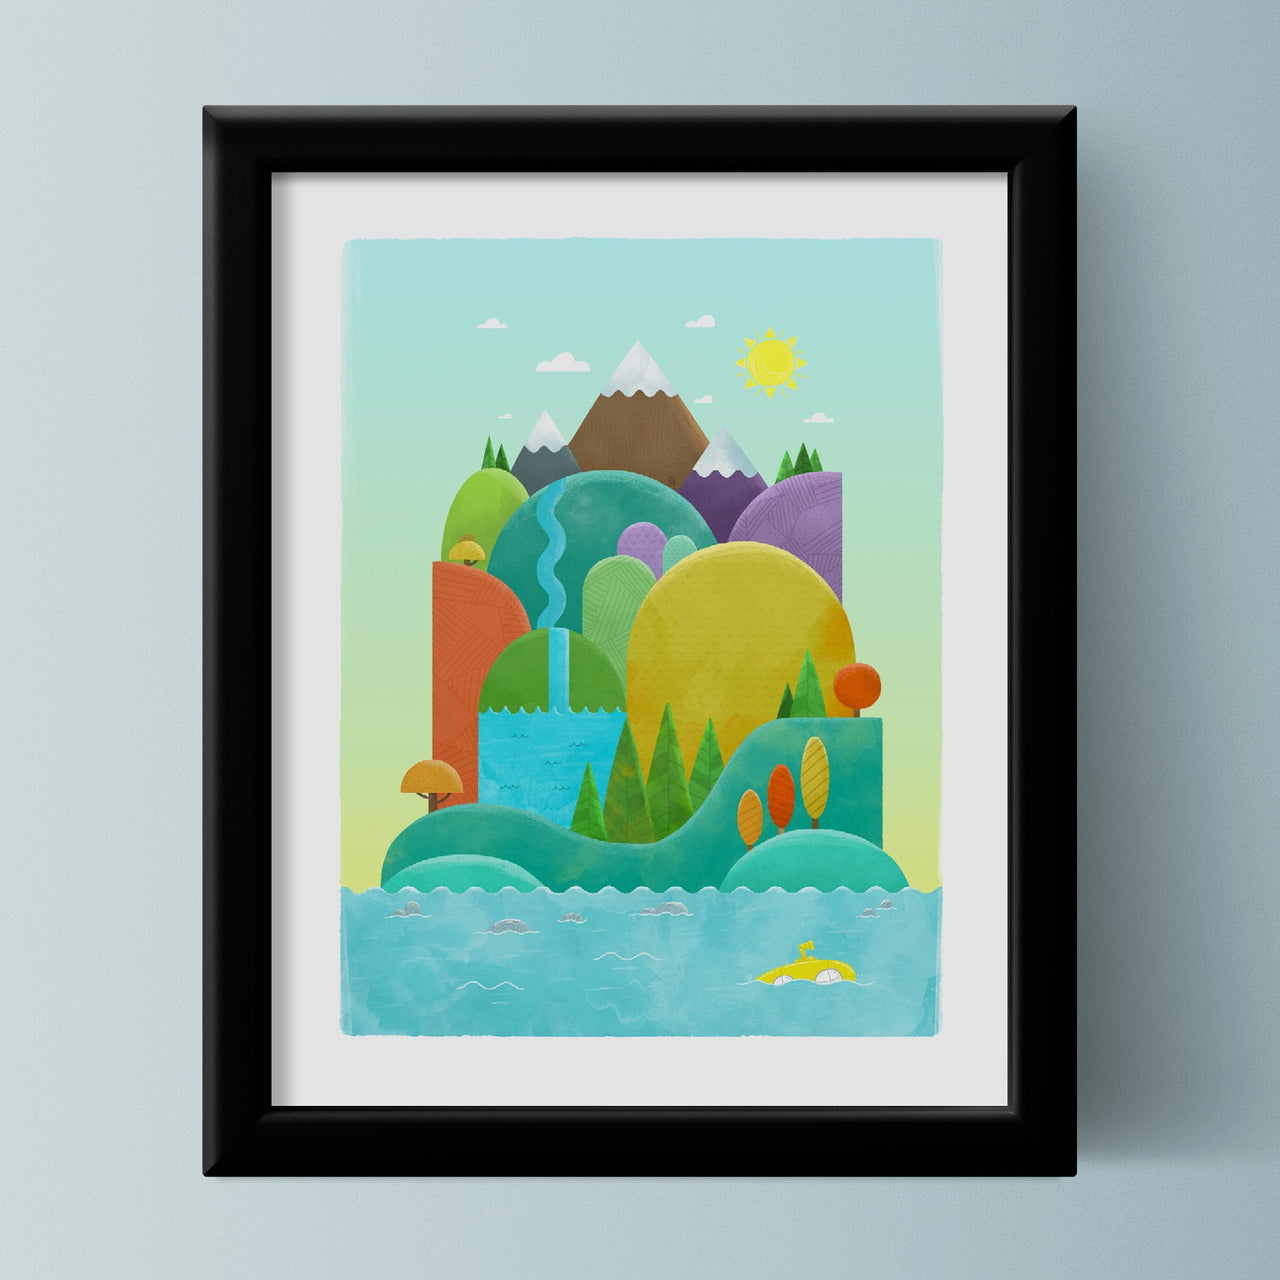 Island of Discovery: Day | 11x14 Unframed Art Print